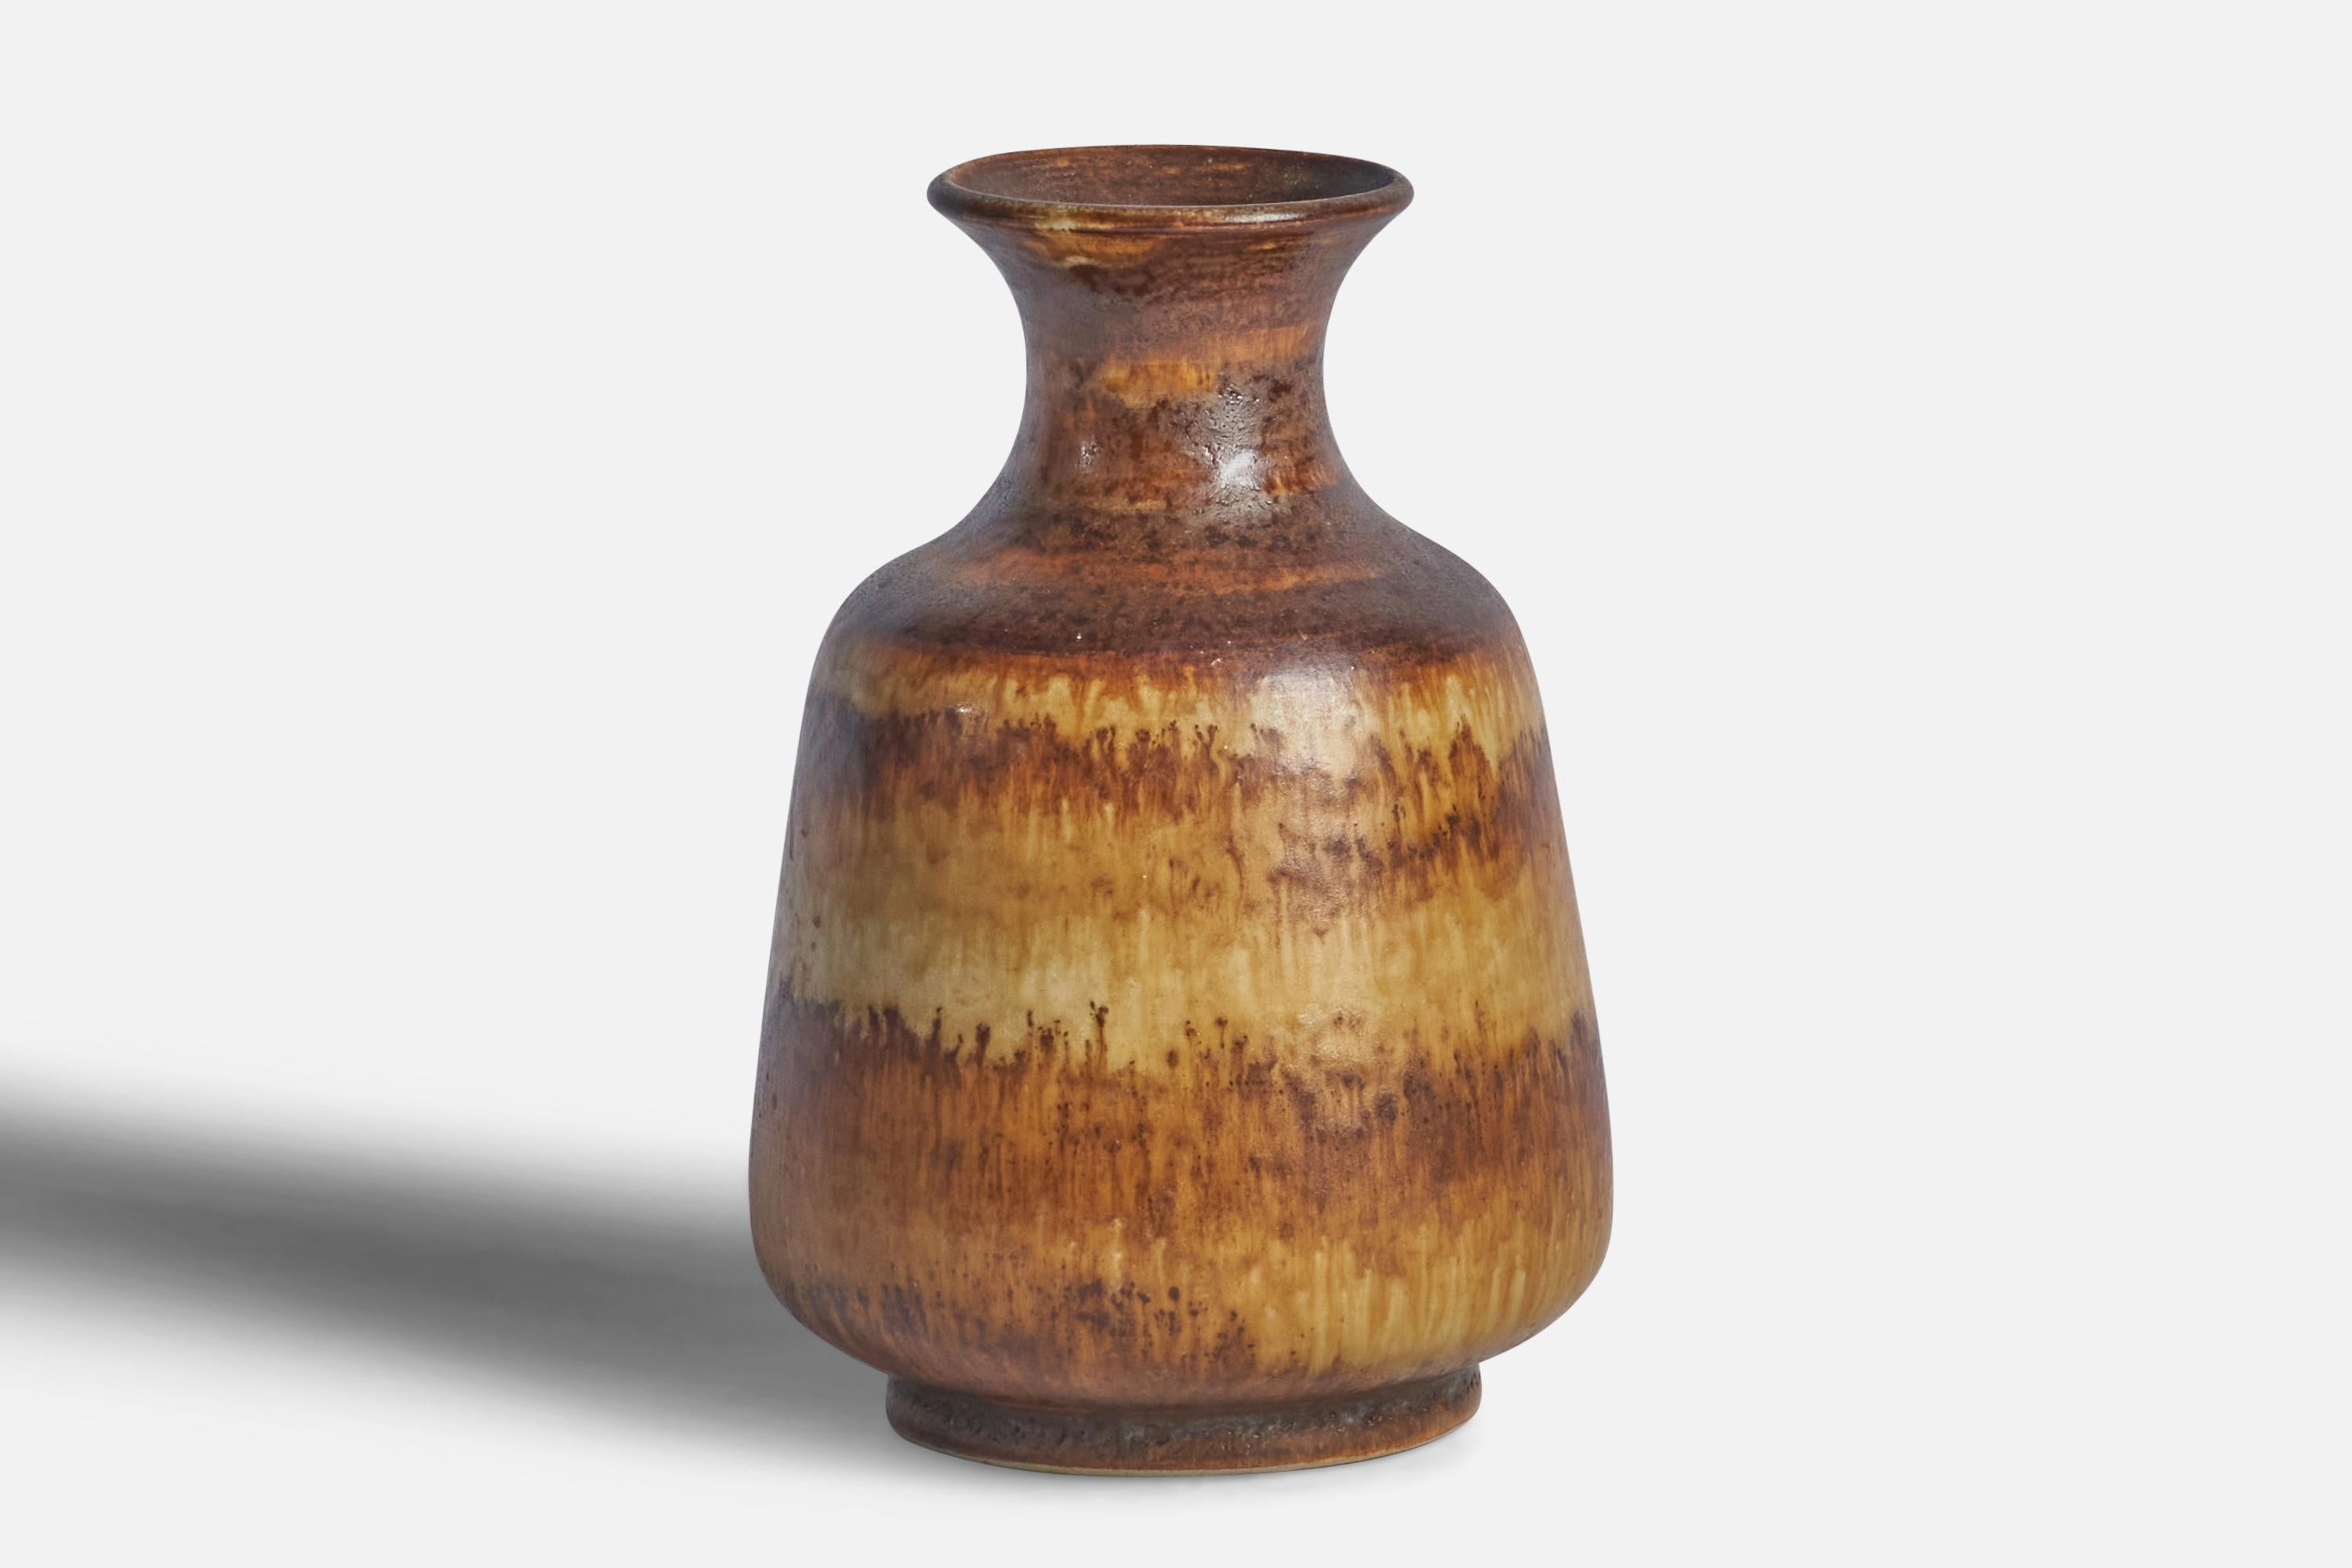 A brown and beige-glazed stoneware vase designed by Gunnar Andersson and produced by Höganäs Keramik, Sweden, c. 1970s.